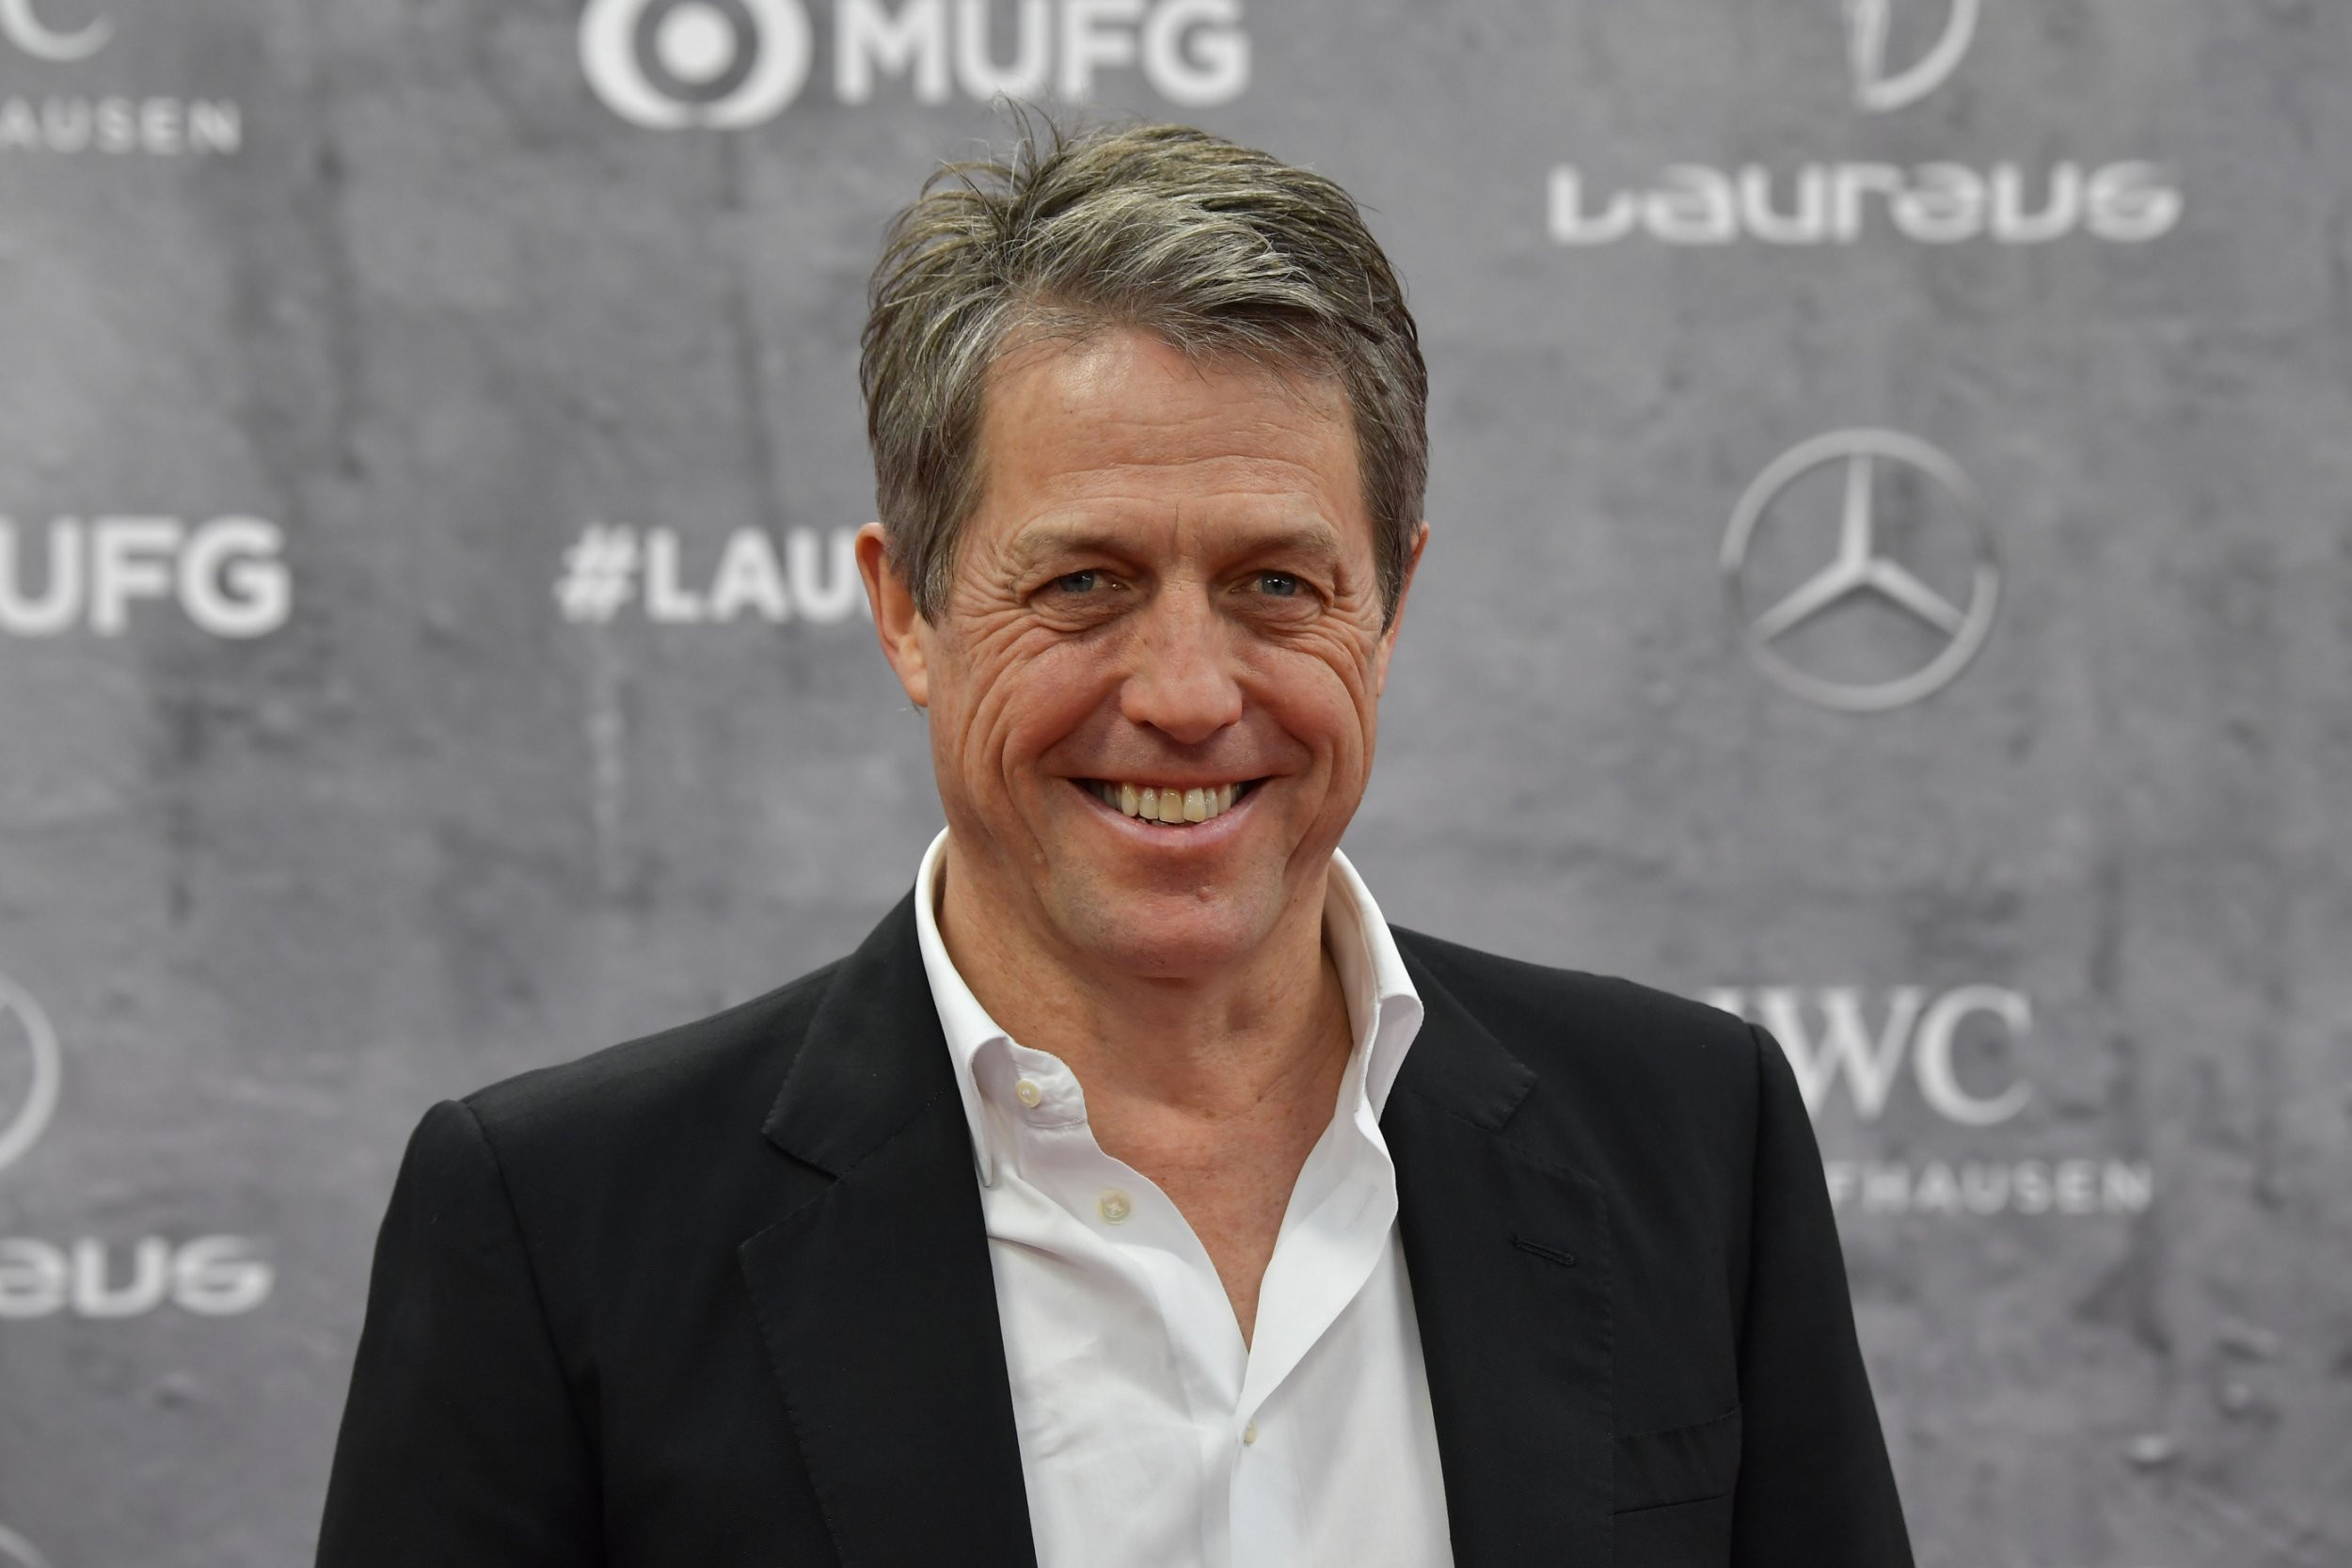 Hugh Grant becomes this week’s favourite meme with hilarious play on actor’s name